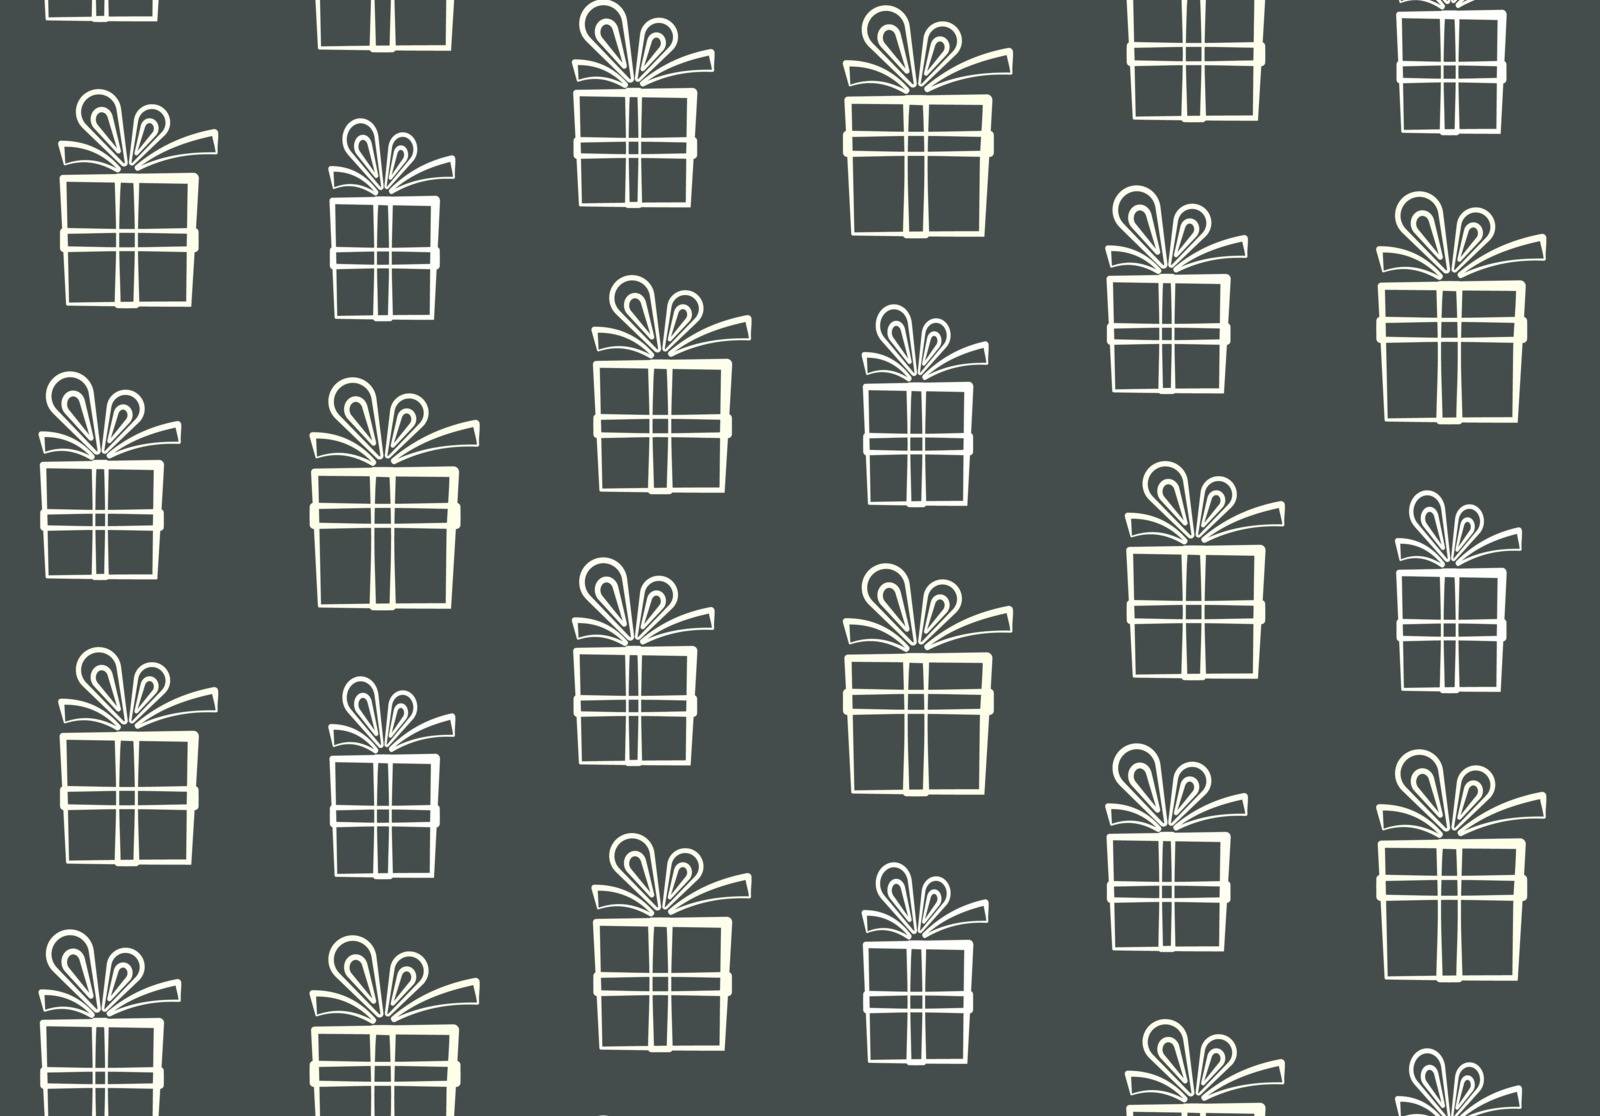 Cute outline white gift boxes pattern, nice present box silhouette pattern, wrapping paper